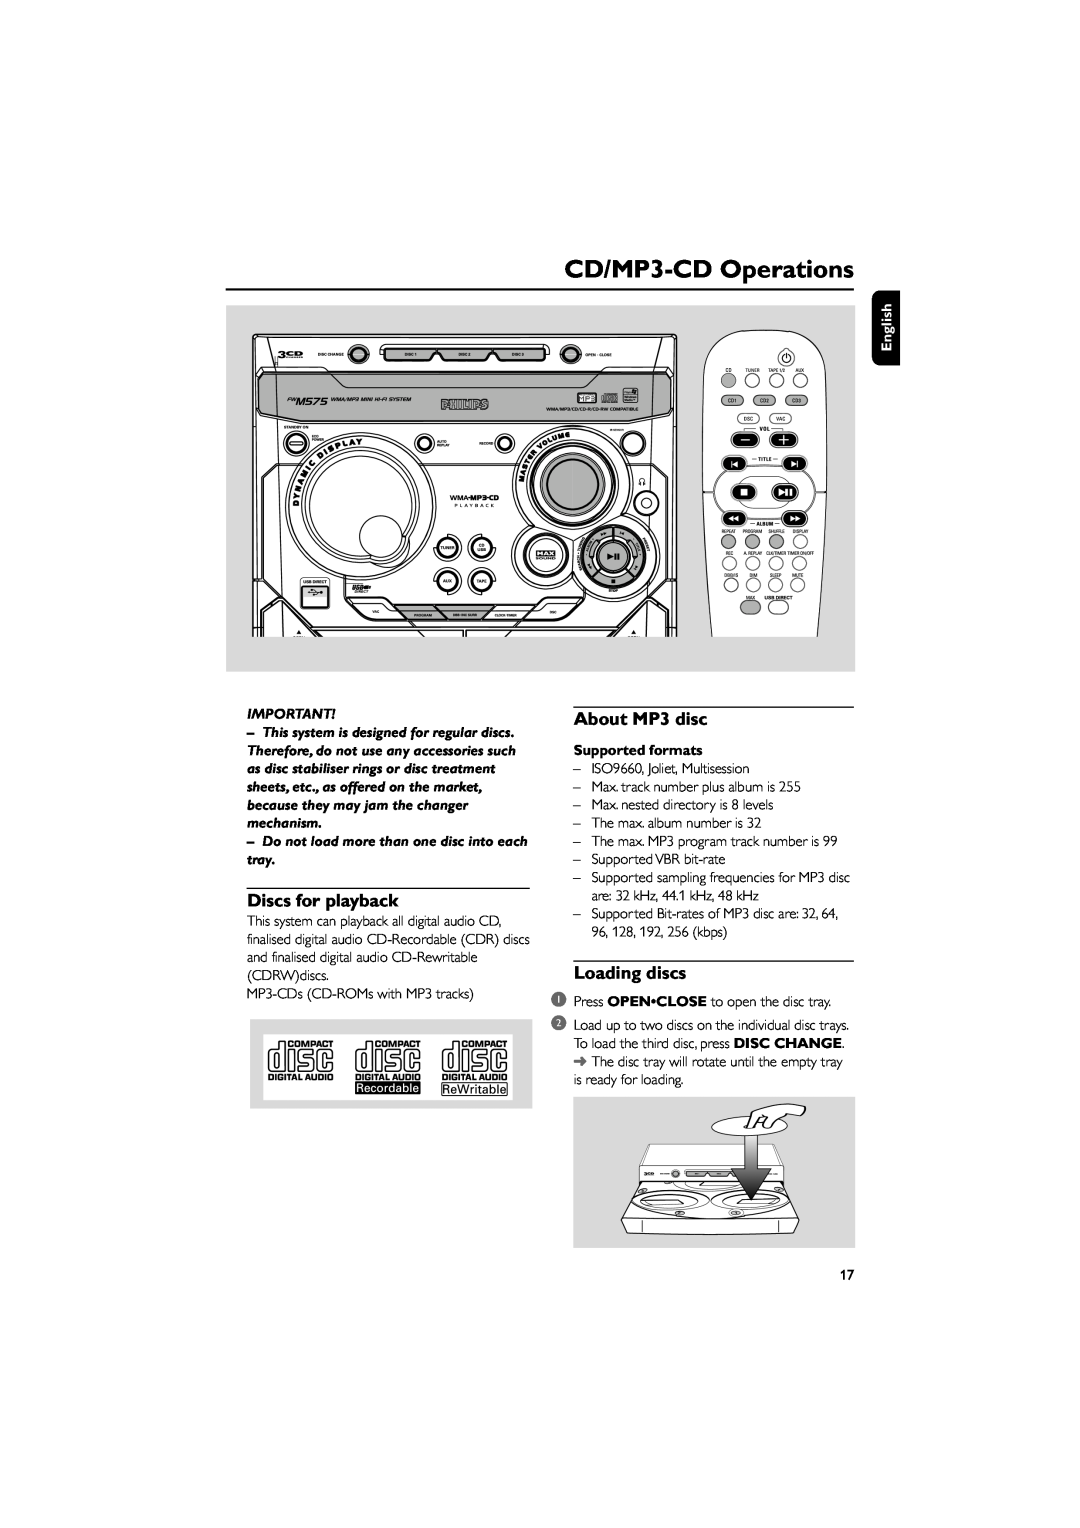 Philips FWM575/37B CD/MP3-CDOperations, Discs for playback, About MP3 disc, Loading discs, English, Supported formats 